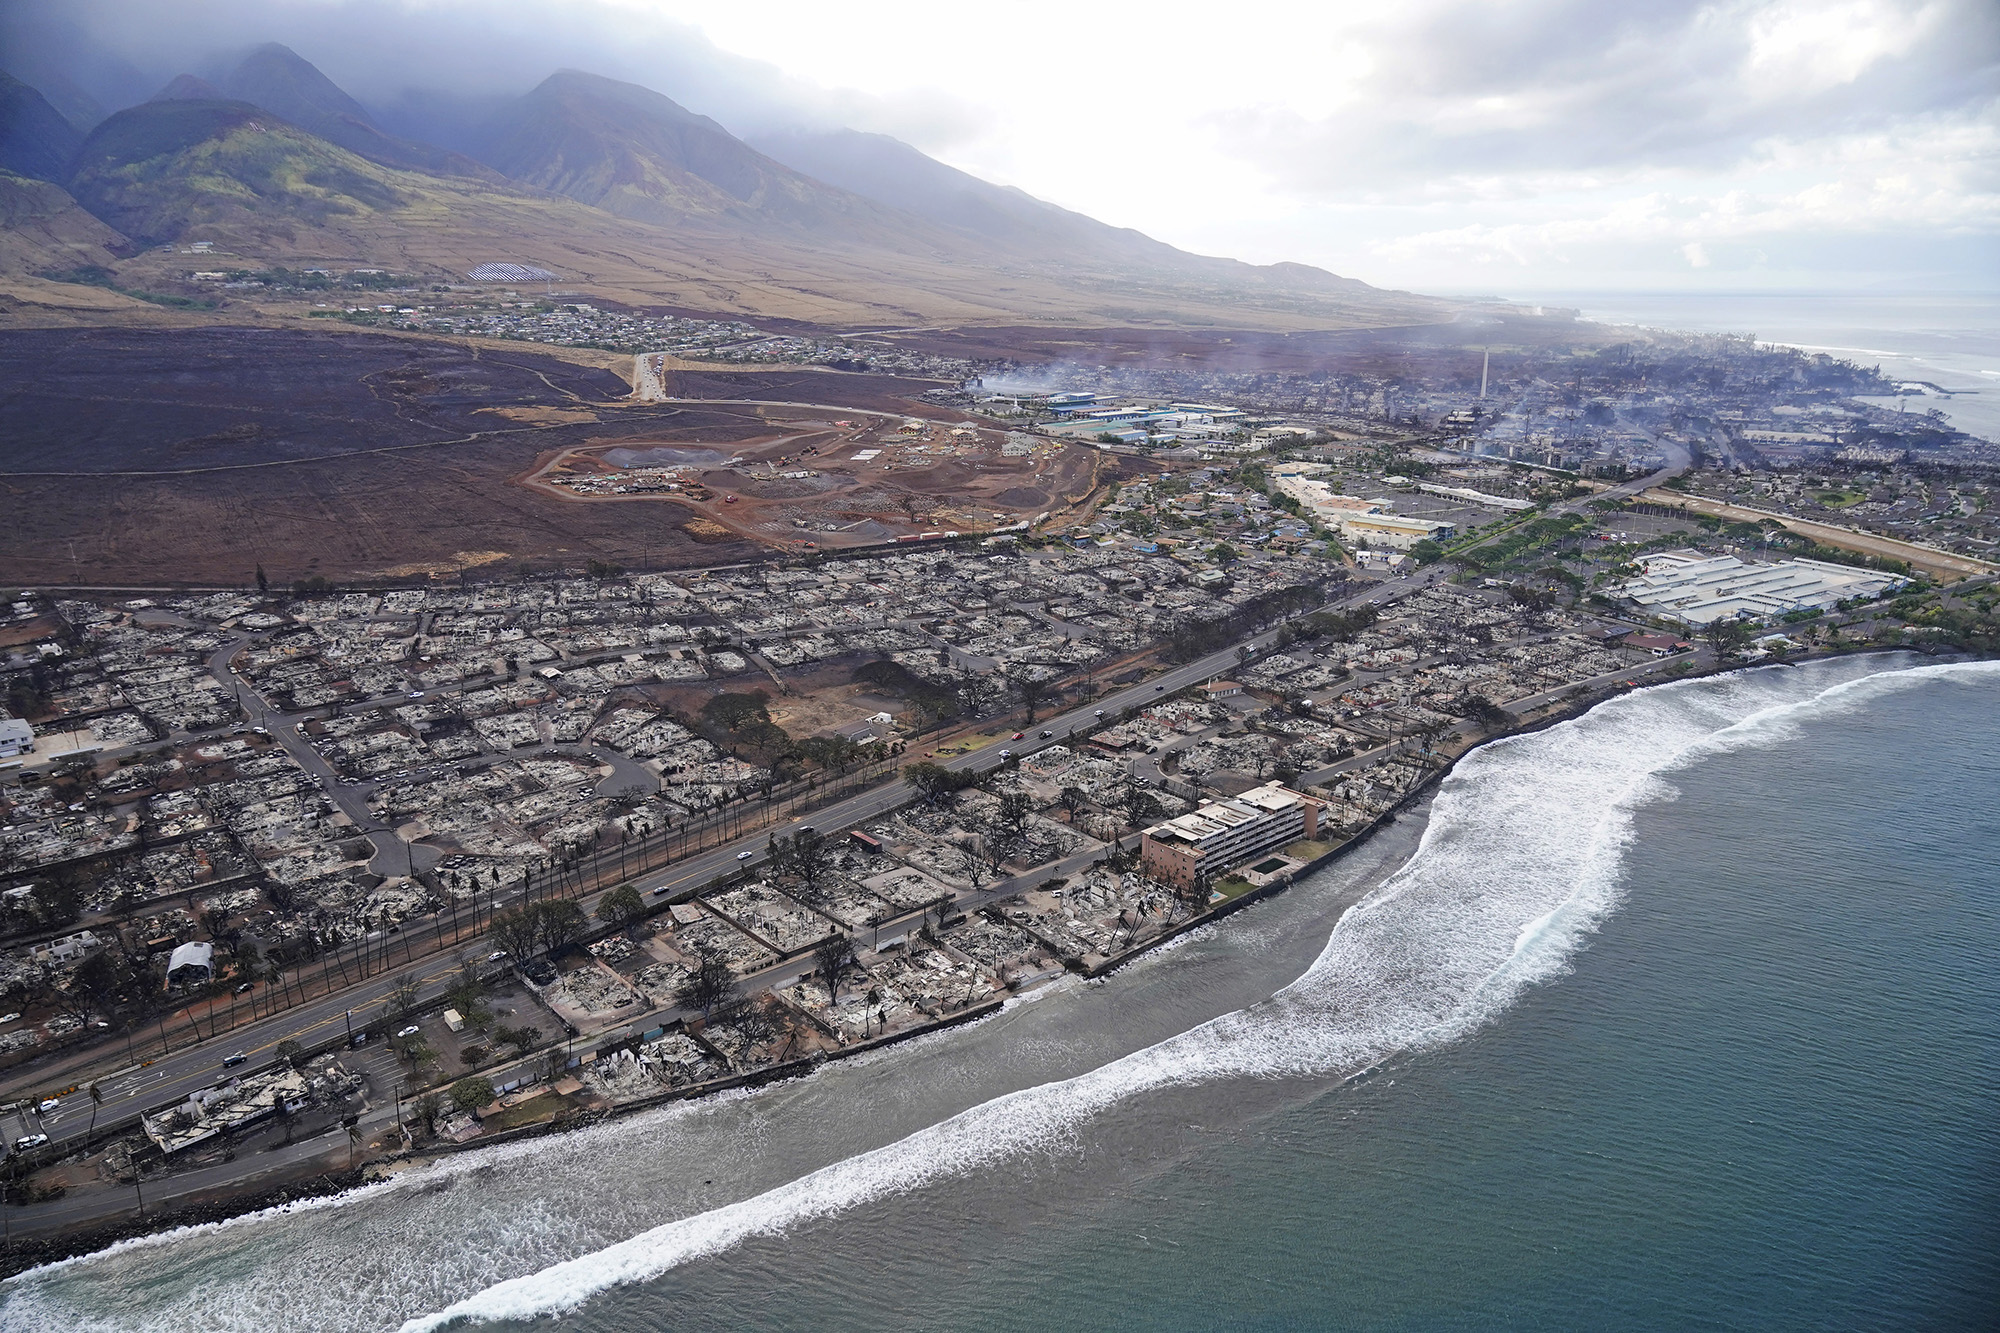 The aftermath of the wildfire in Lahaina, Hawaii, on August 10.